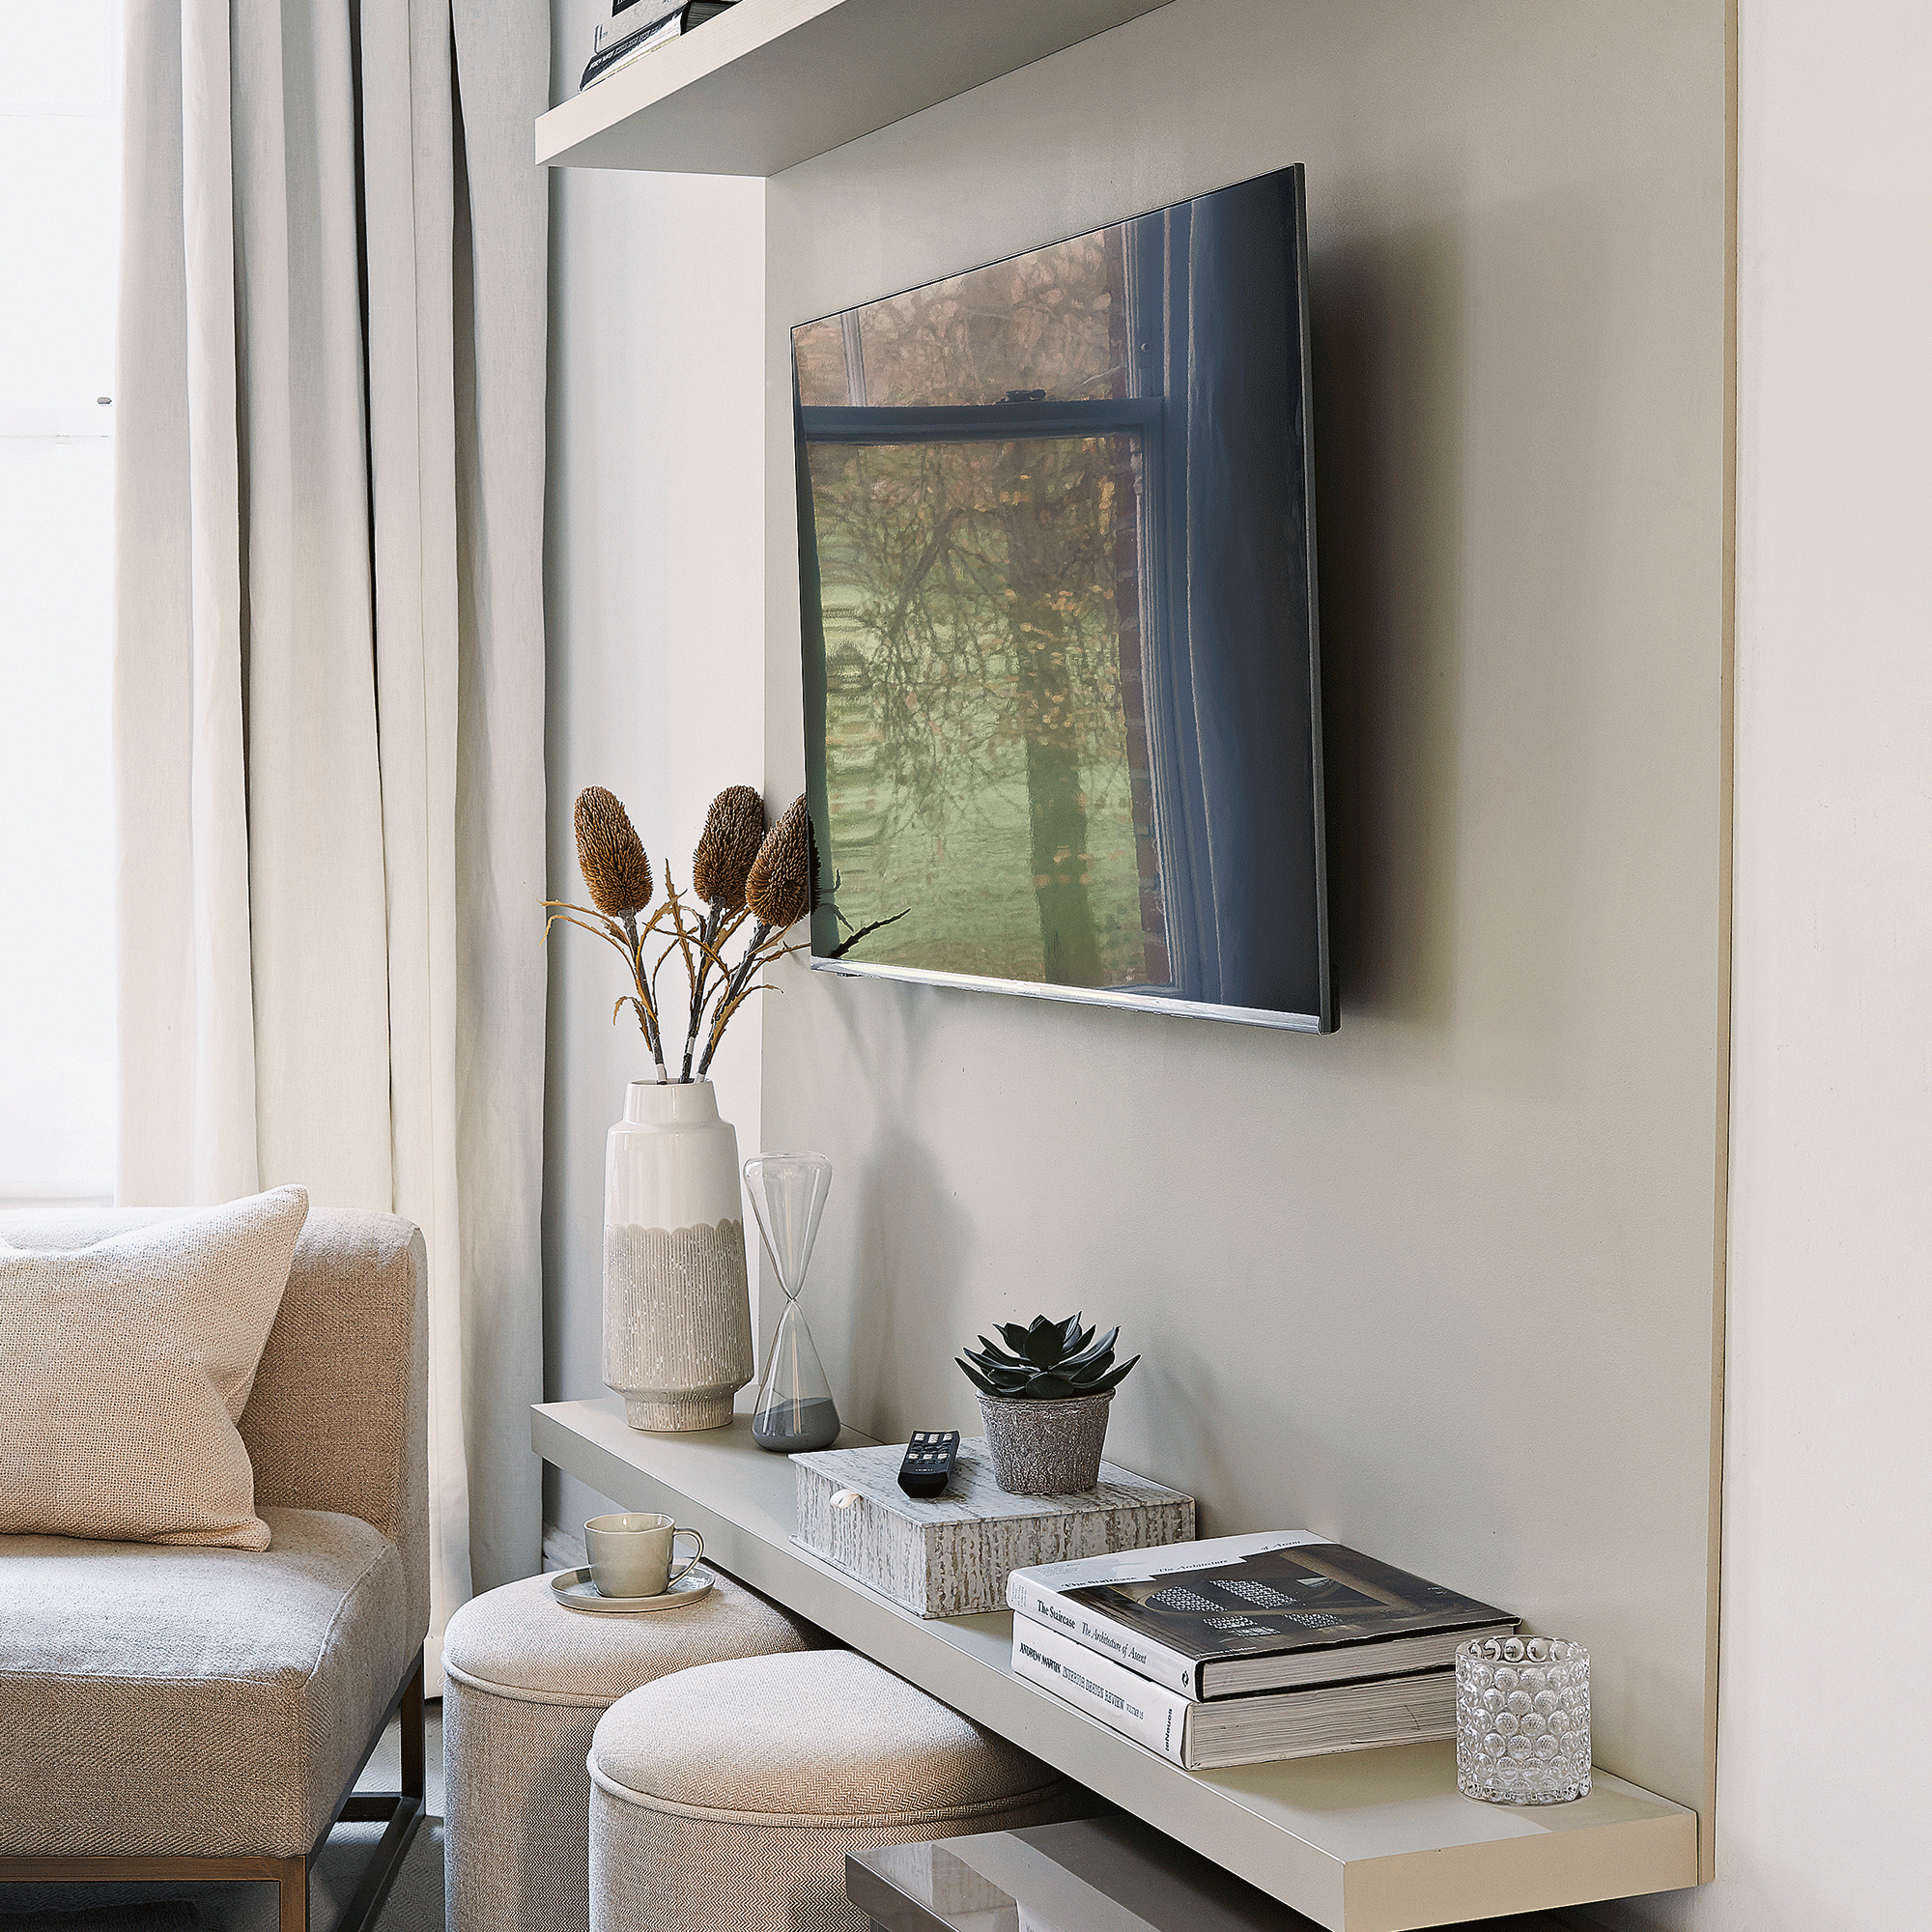 TV mounted on a grey living room wall